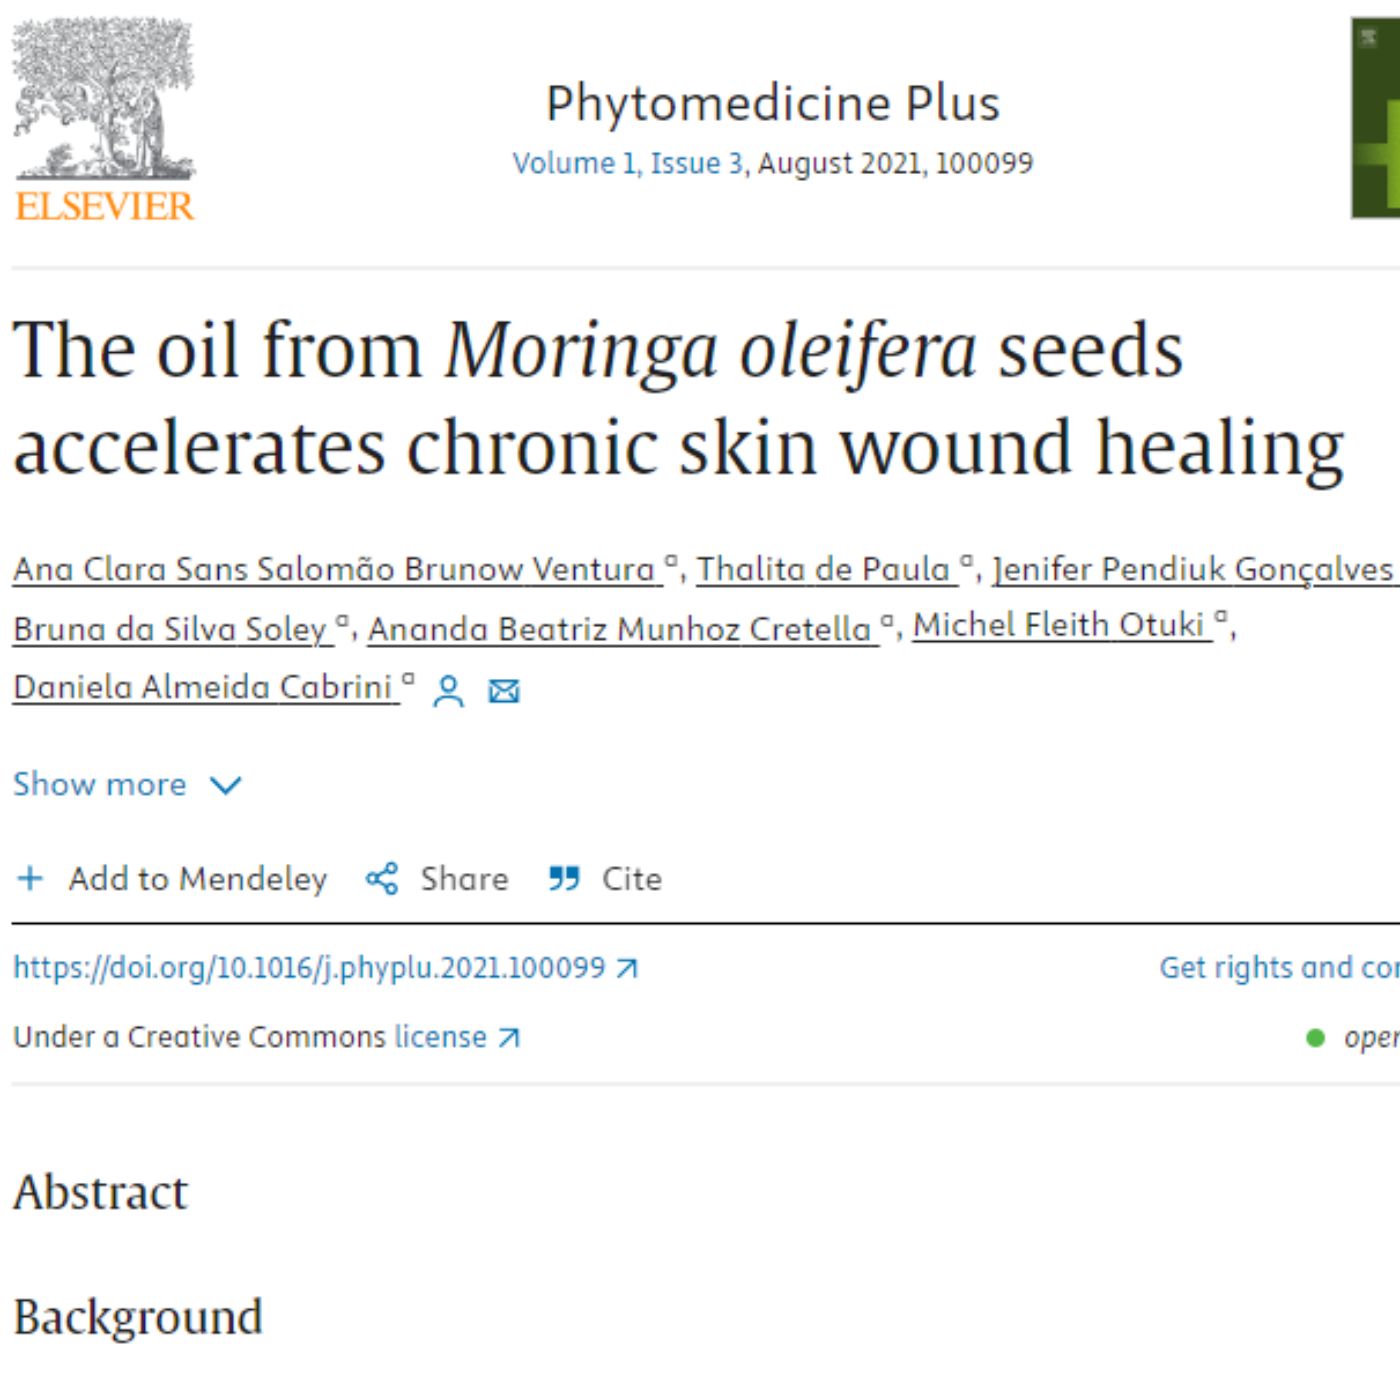 research The oil from Moringa oleifera seeds accelerates chronic skin wound healing